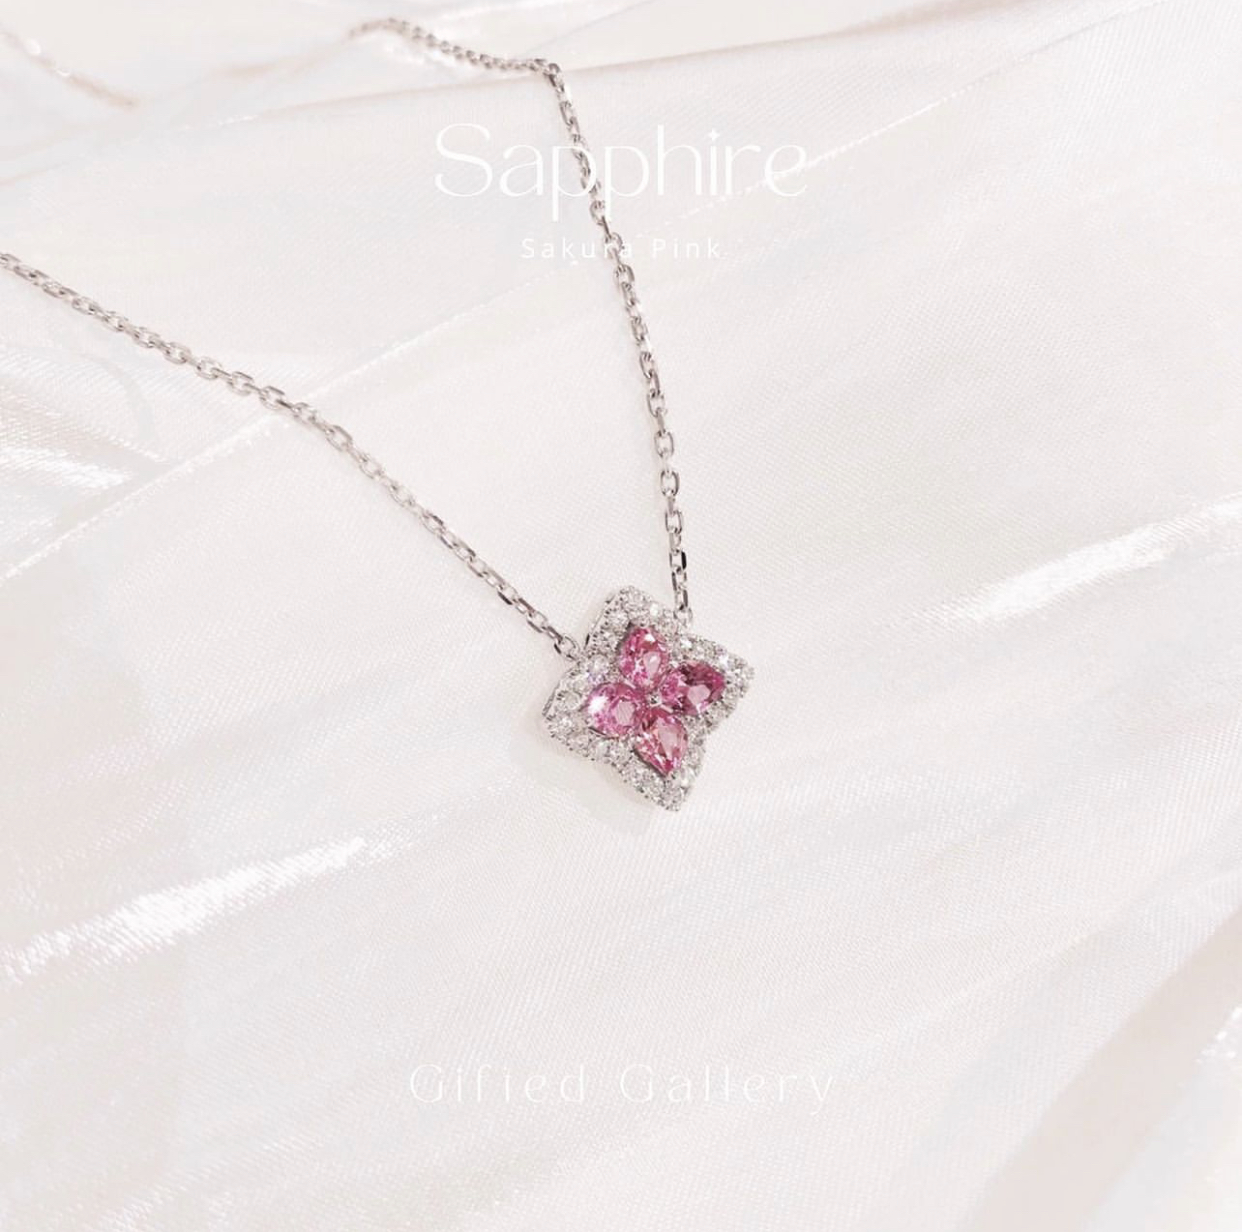 Sakura Sapphire By Gifted Gallery